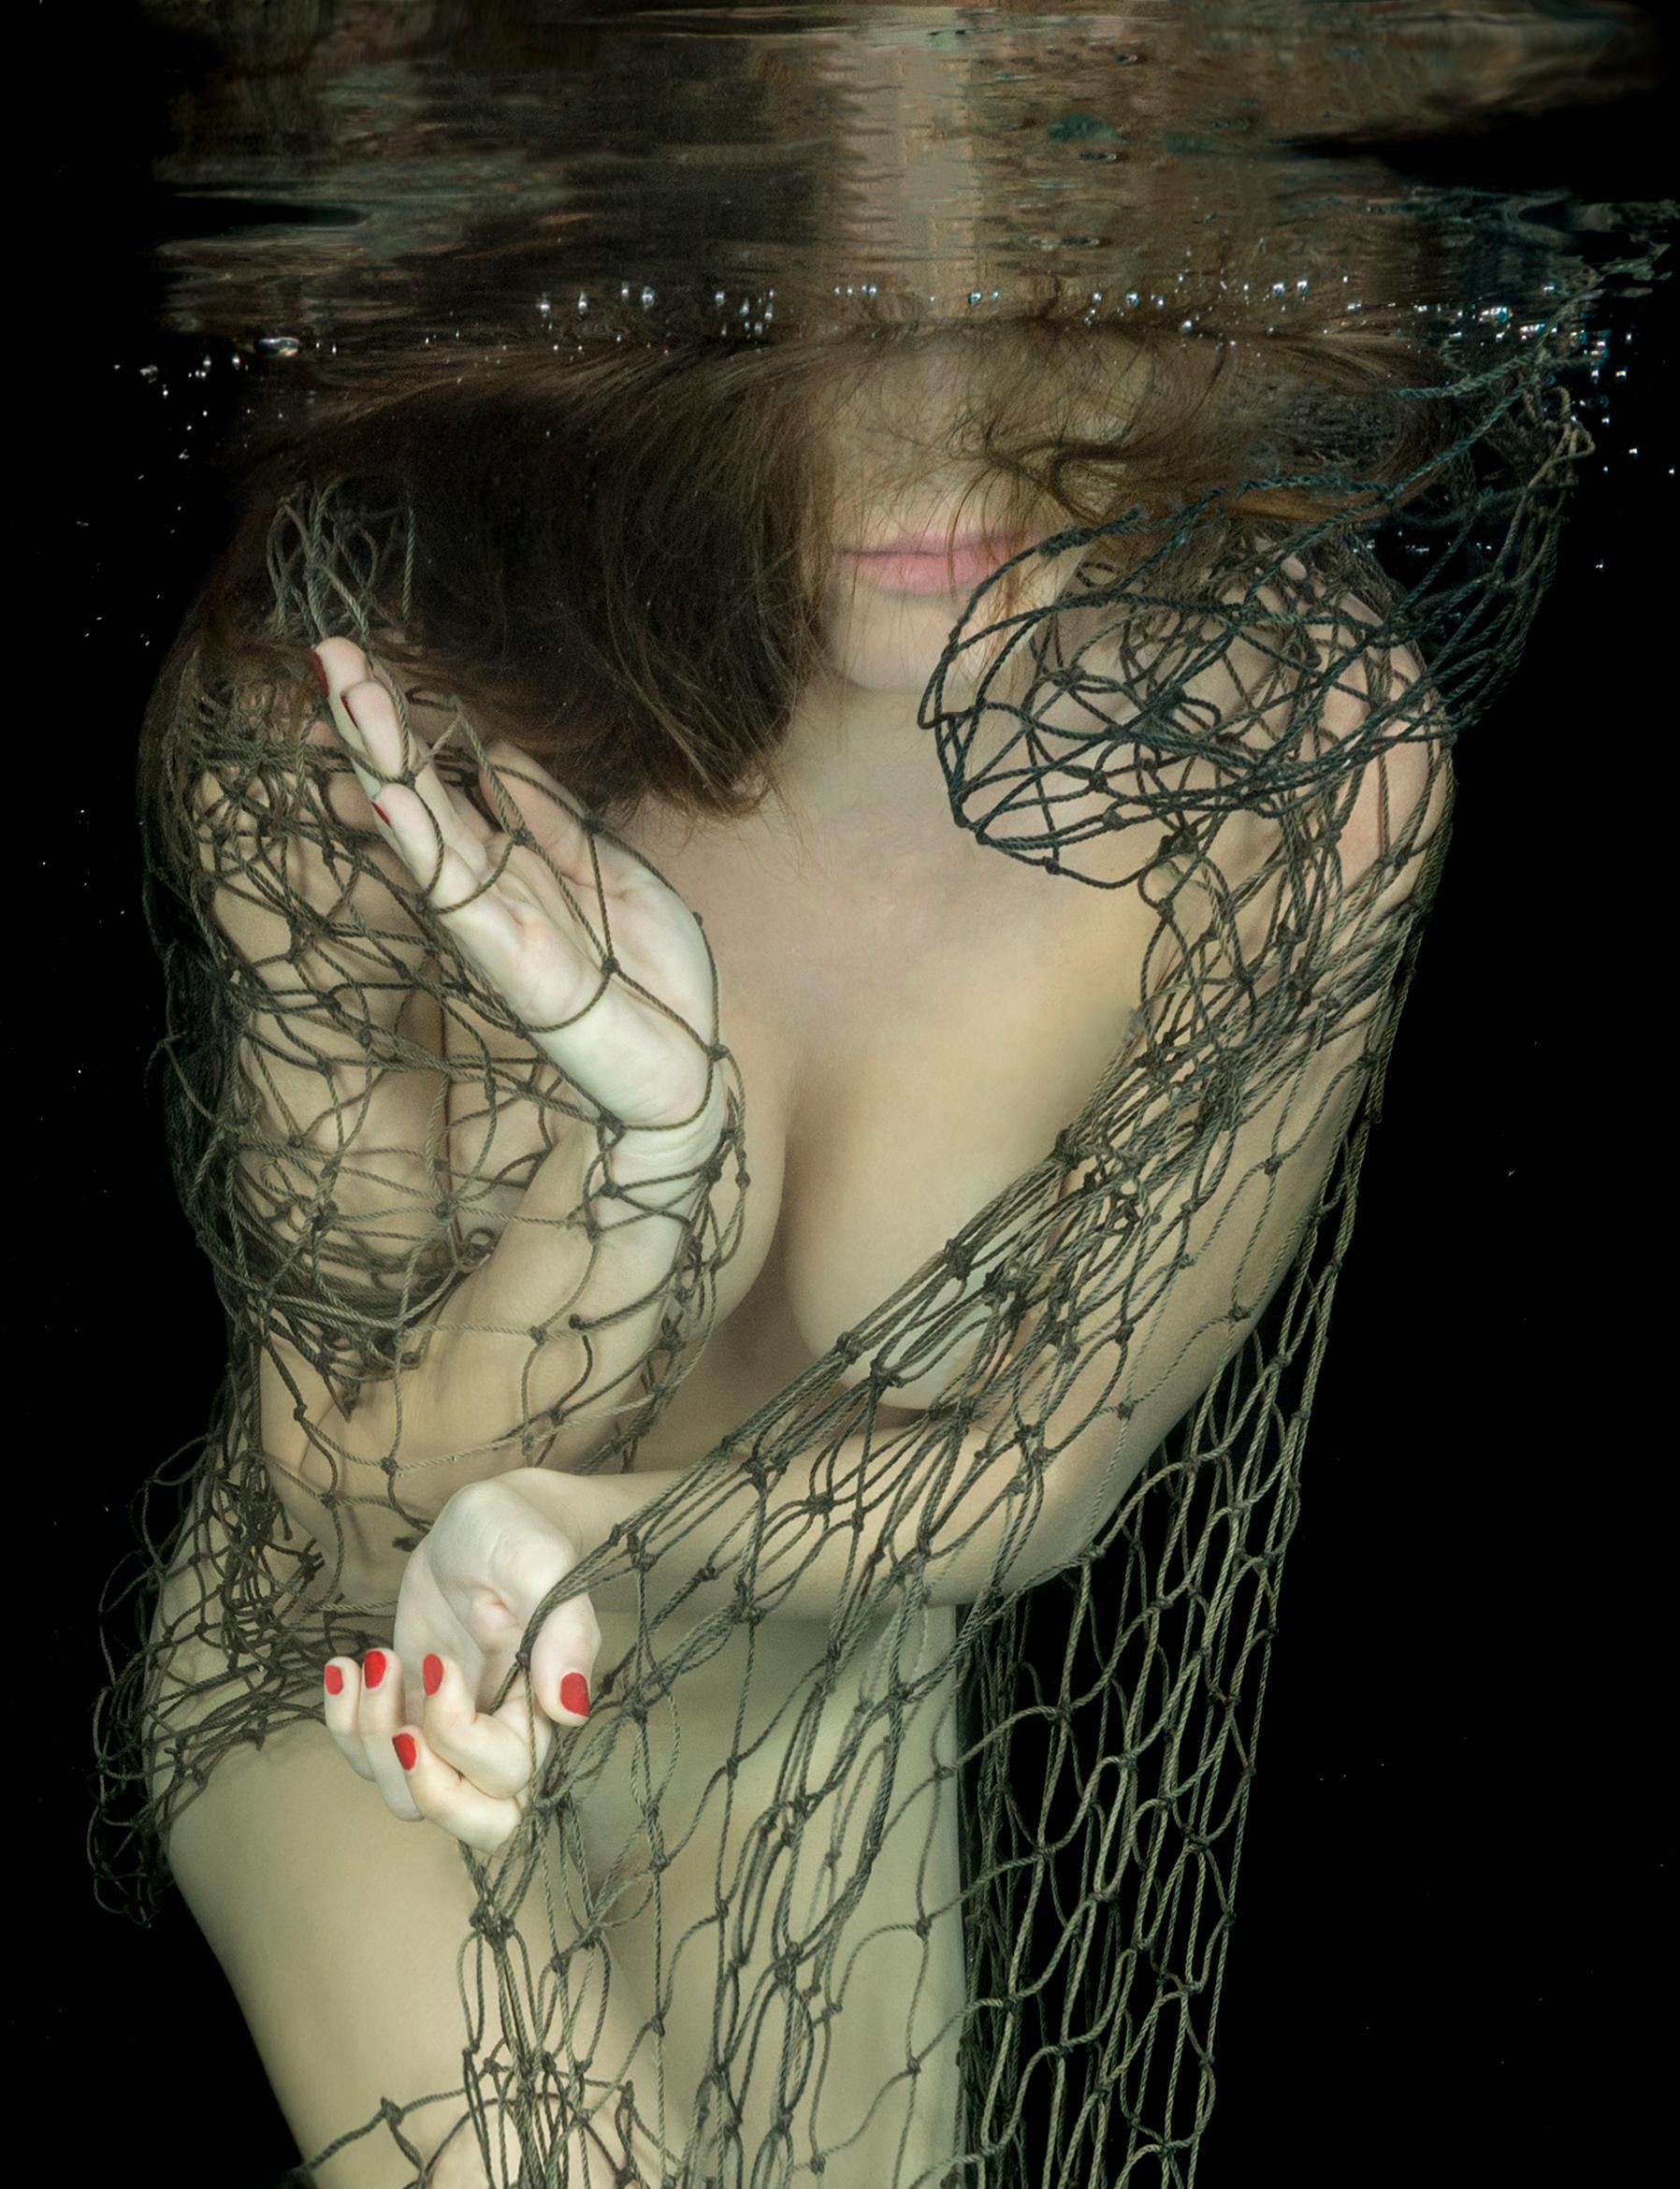 Alex Sher Nude Photograph - Lucky Catch - underwater nude photograph - archival pigment print 58" x 43"